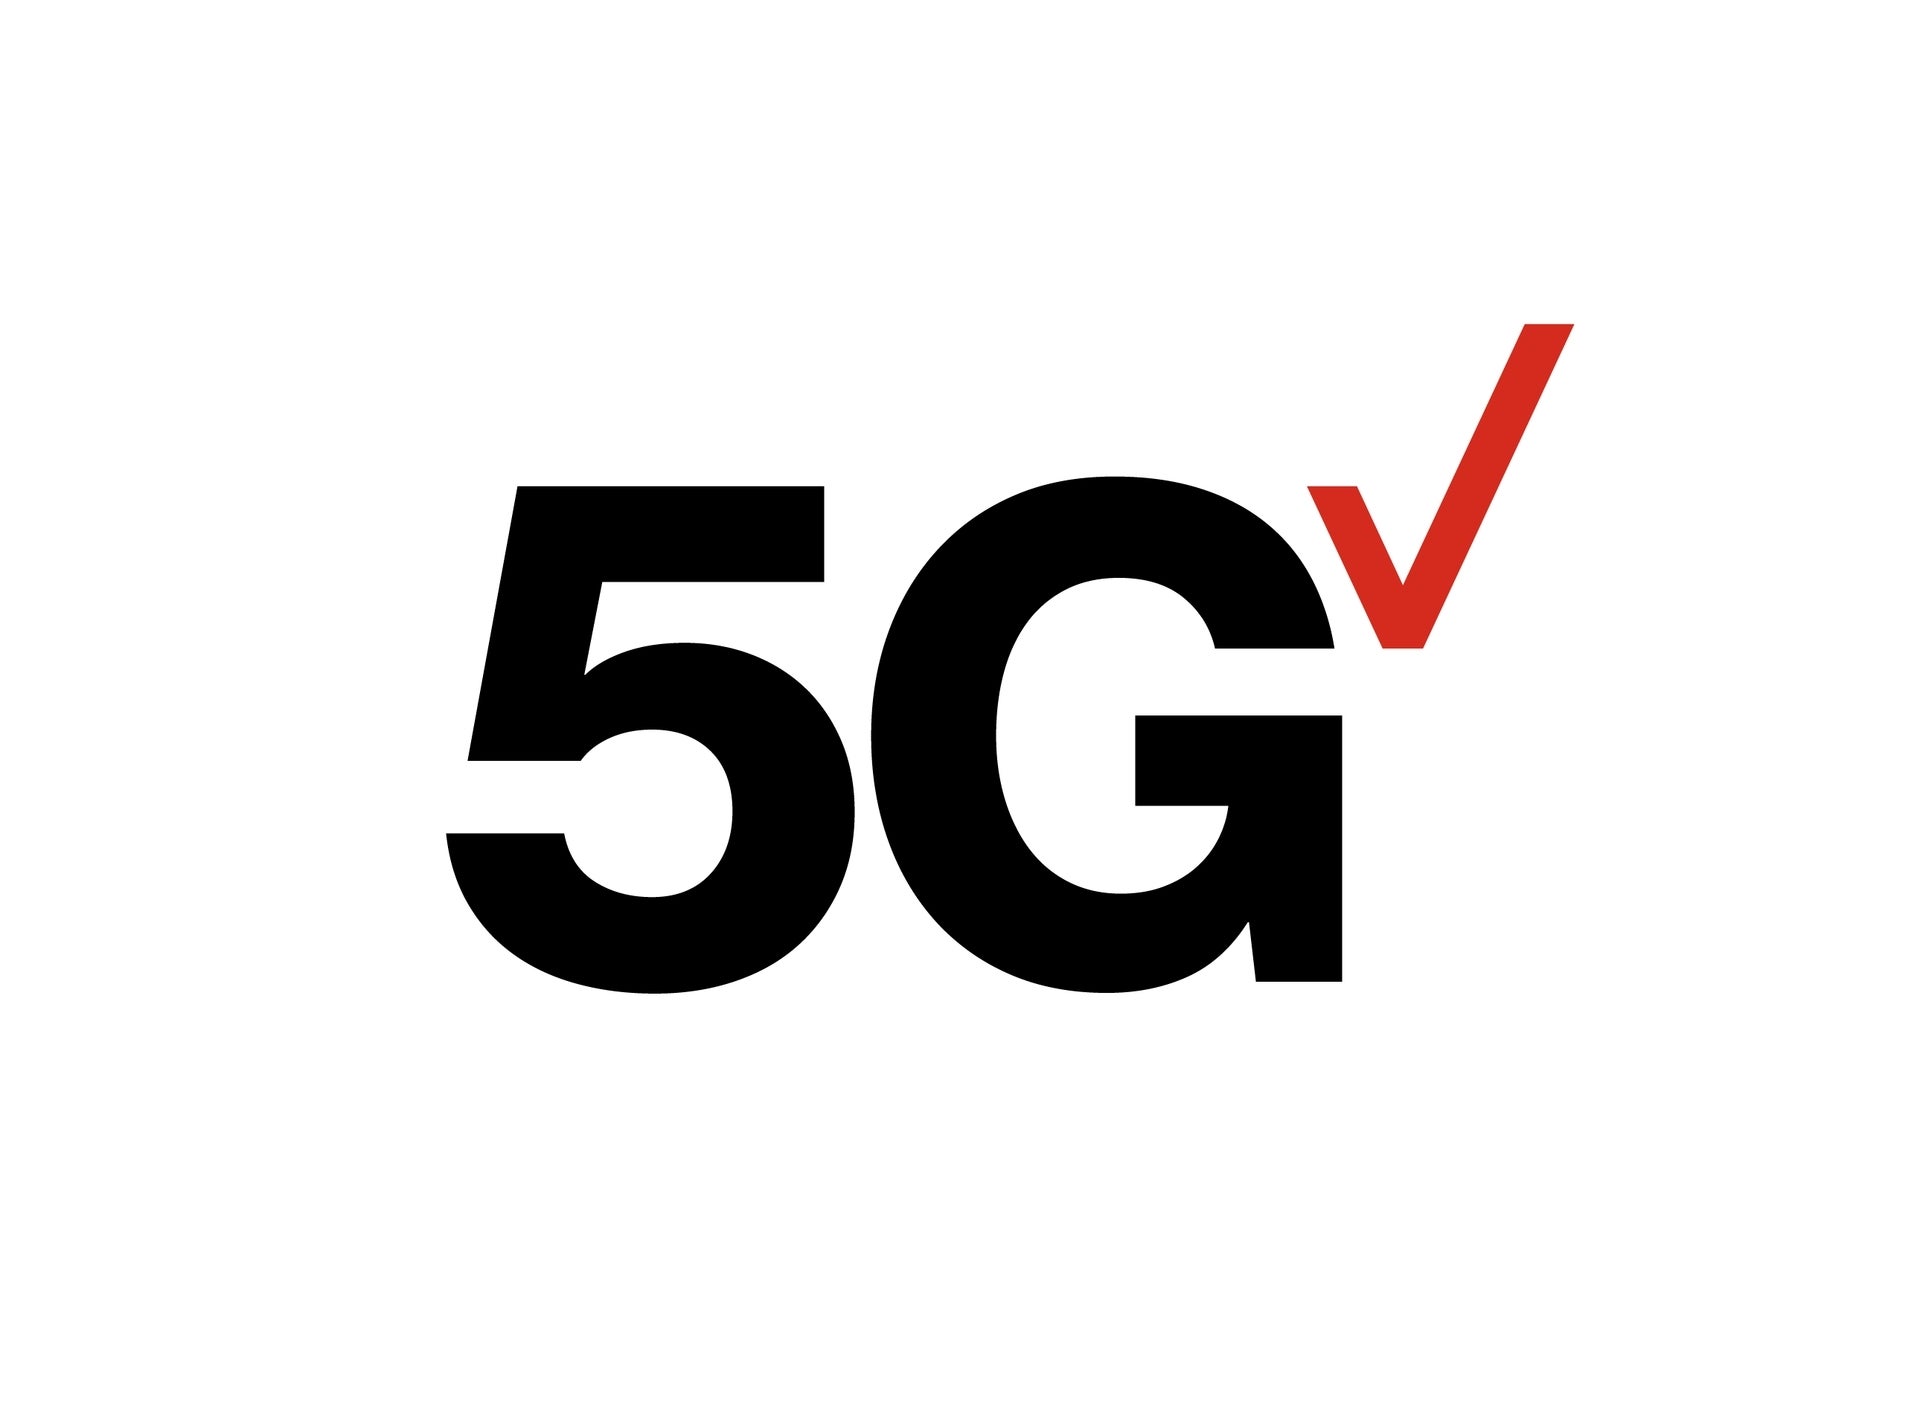 Verizon launches its nationwide 5G network - Verizon launches nationwide 5G service